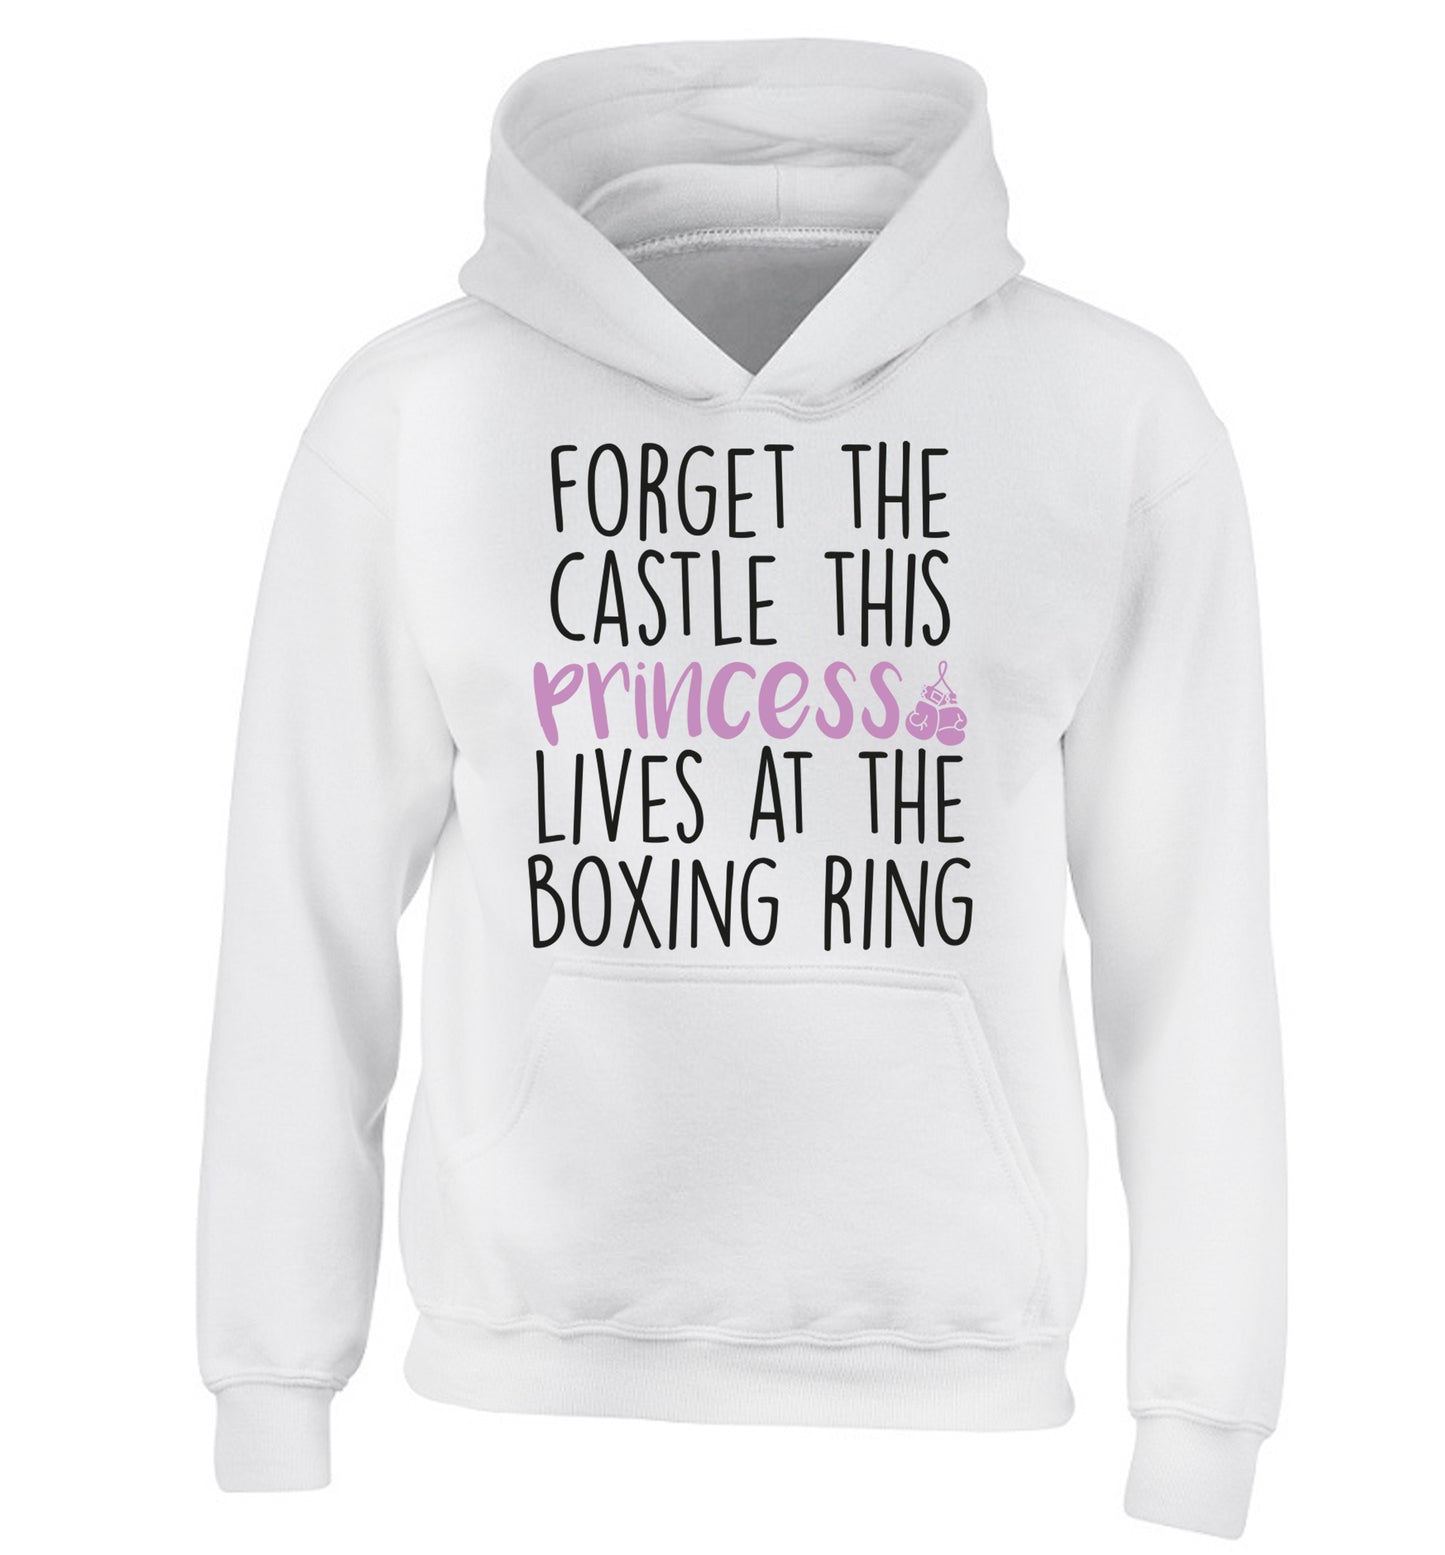 Forget the castle this princess lives at the boxing ring children's white hoodie 12-14 Years